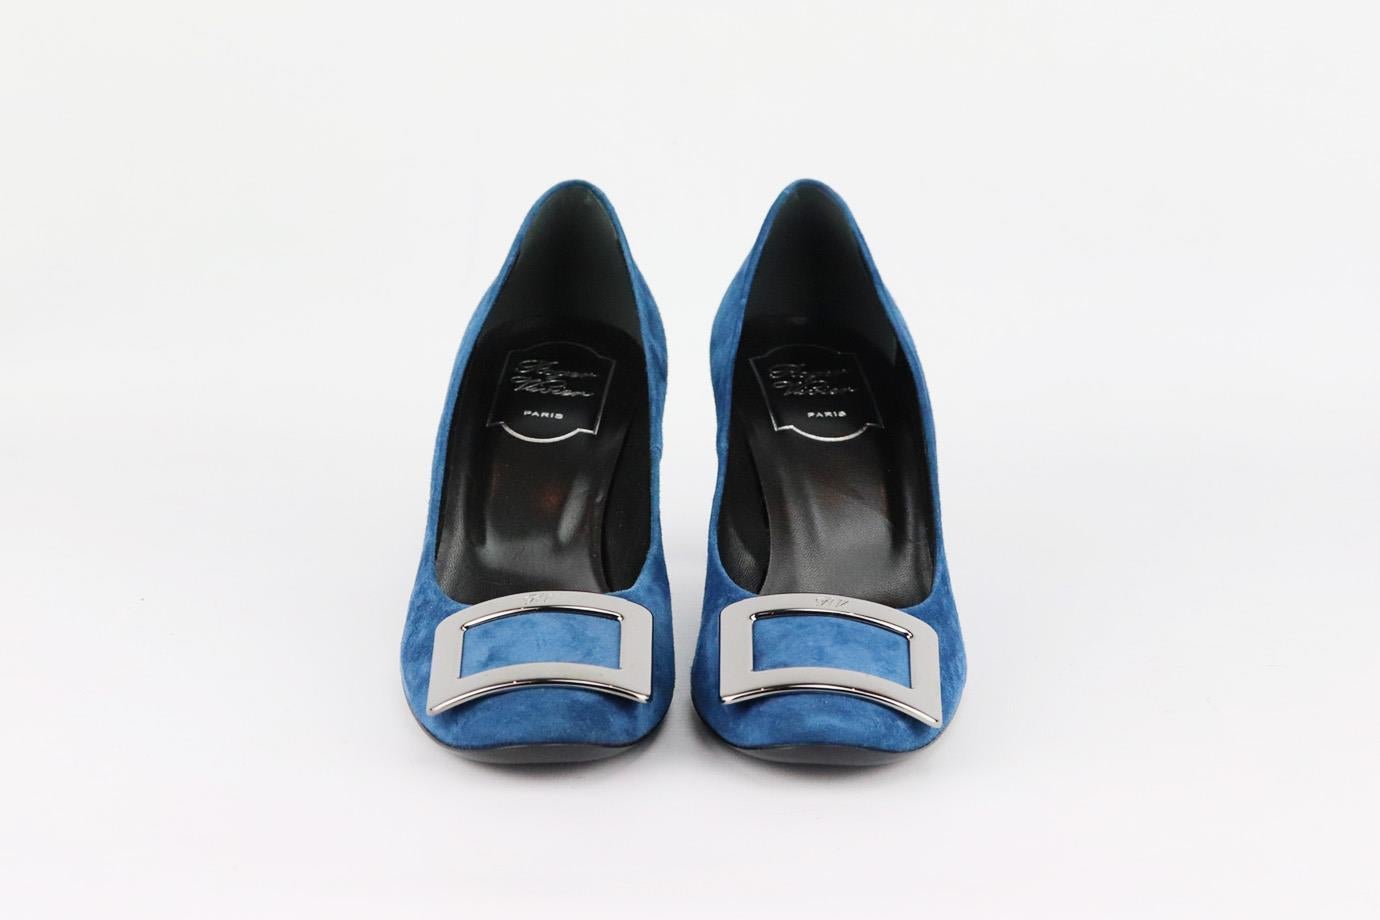 These pumps by Roger Vivier are an elegant re-creation of the founder's original 1965 design, they're made from blue suede and embellished with a silver-tone signature buckle that tops the rounded toe. Heel measures approximately 50 mm/ 2 inches.